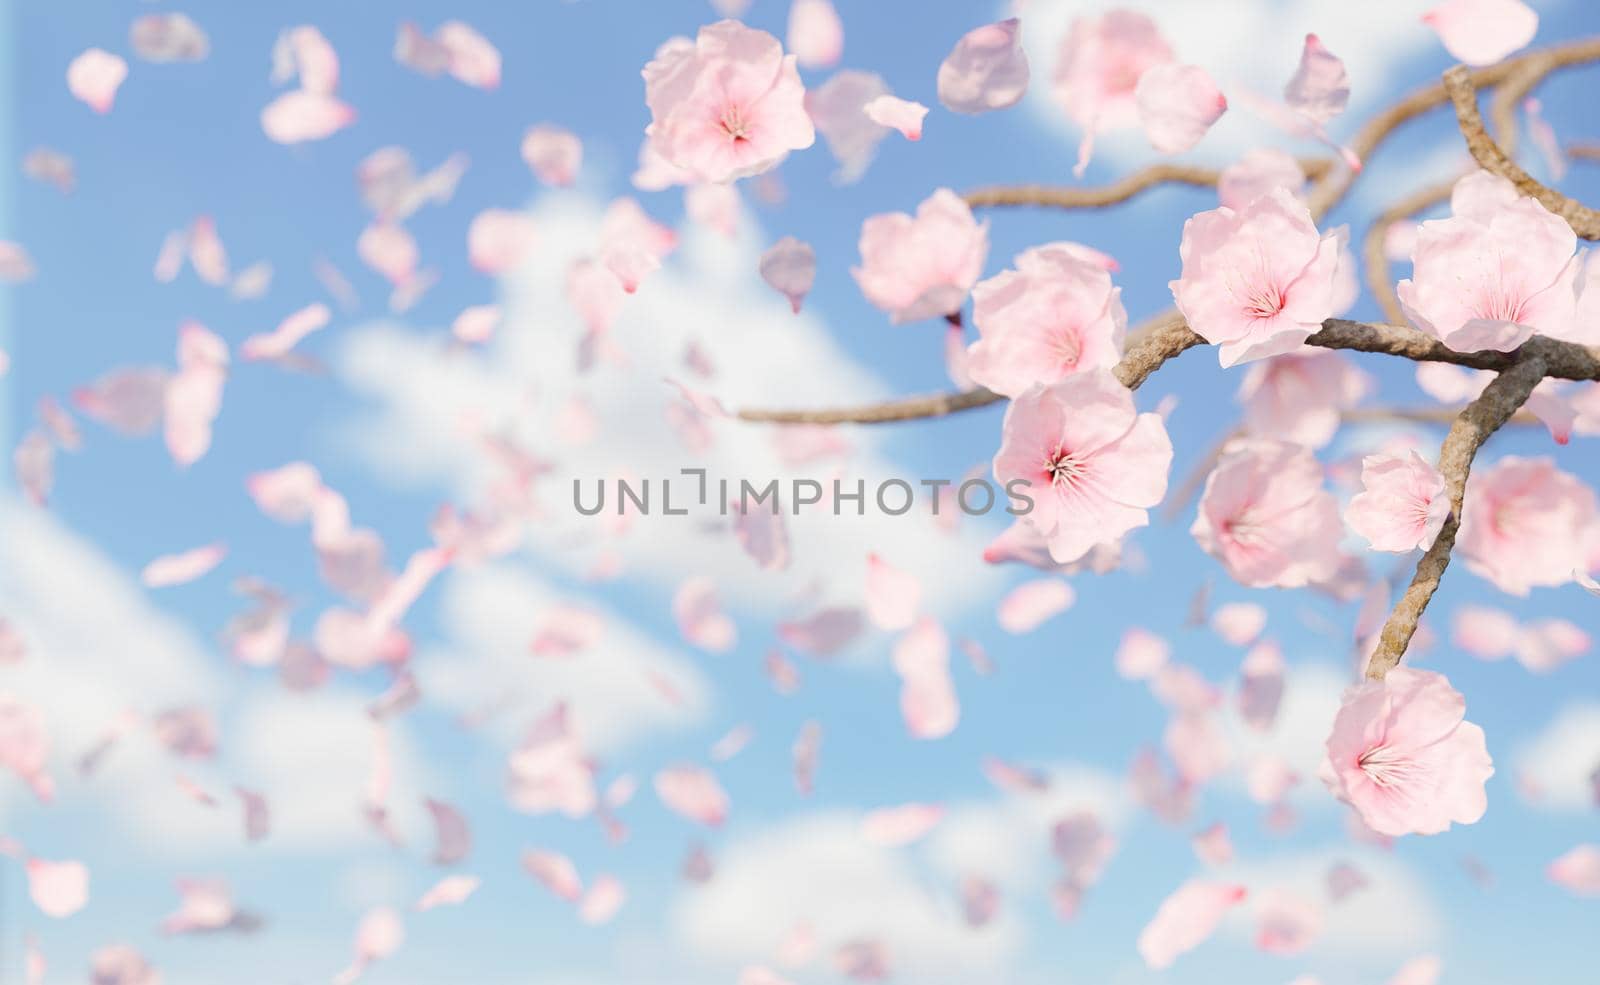 background of falling cherry blossoms and petals with blurred sky. 3d rendering